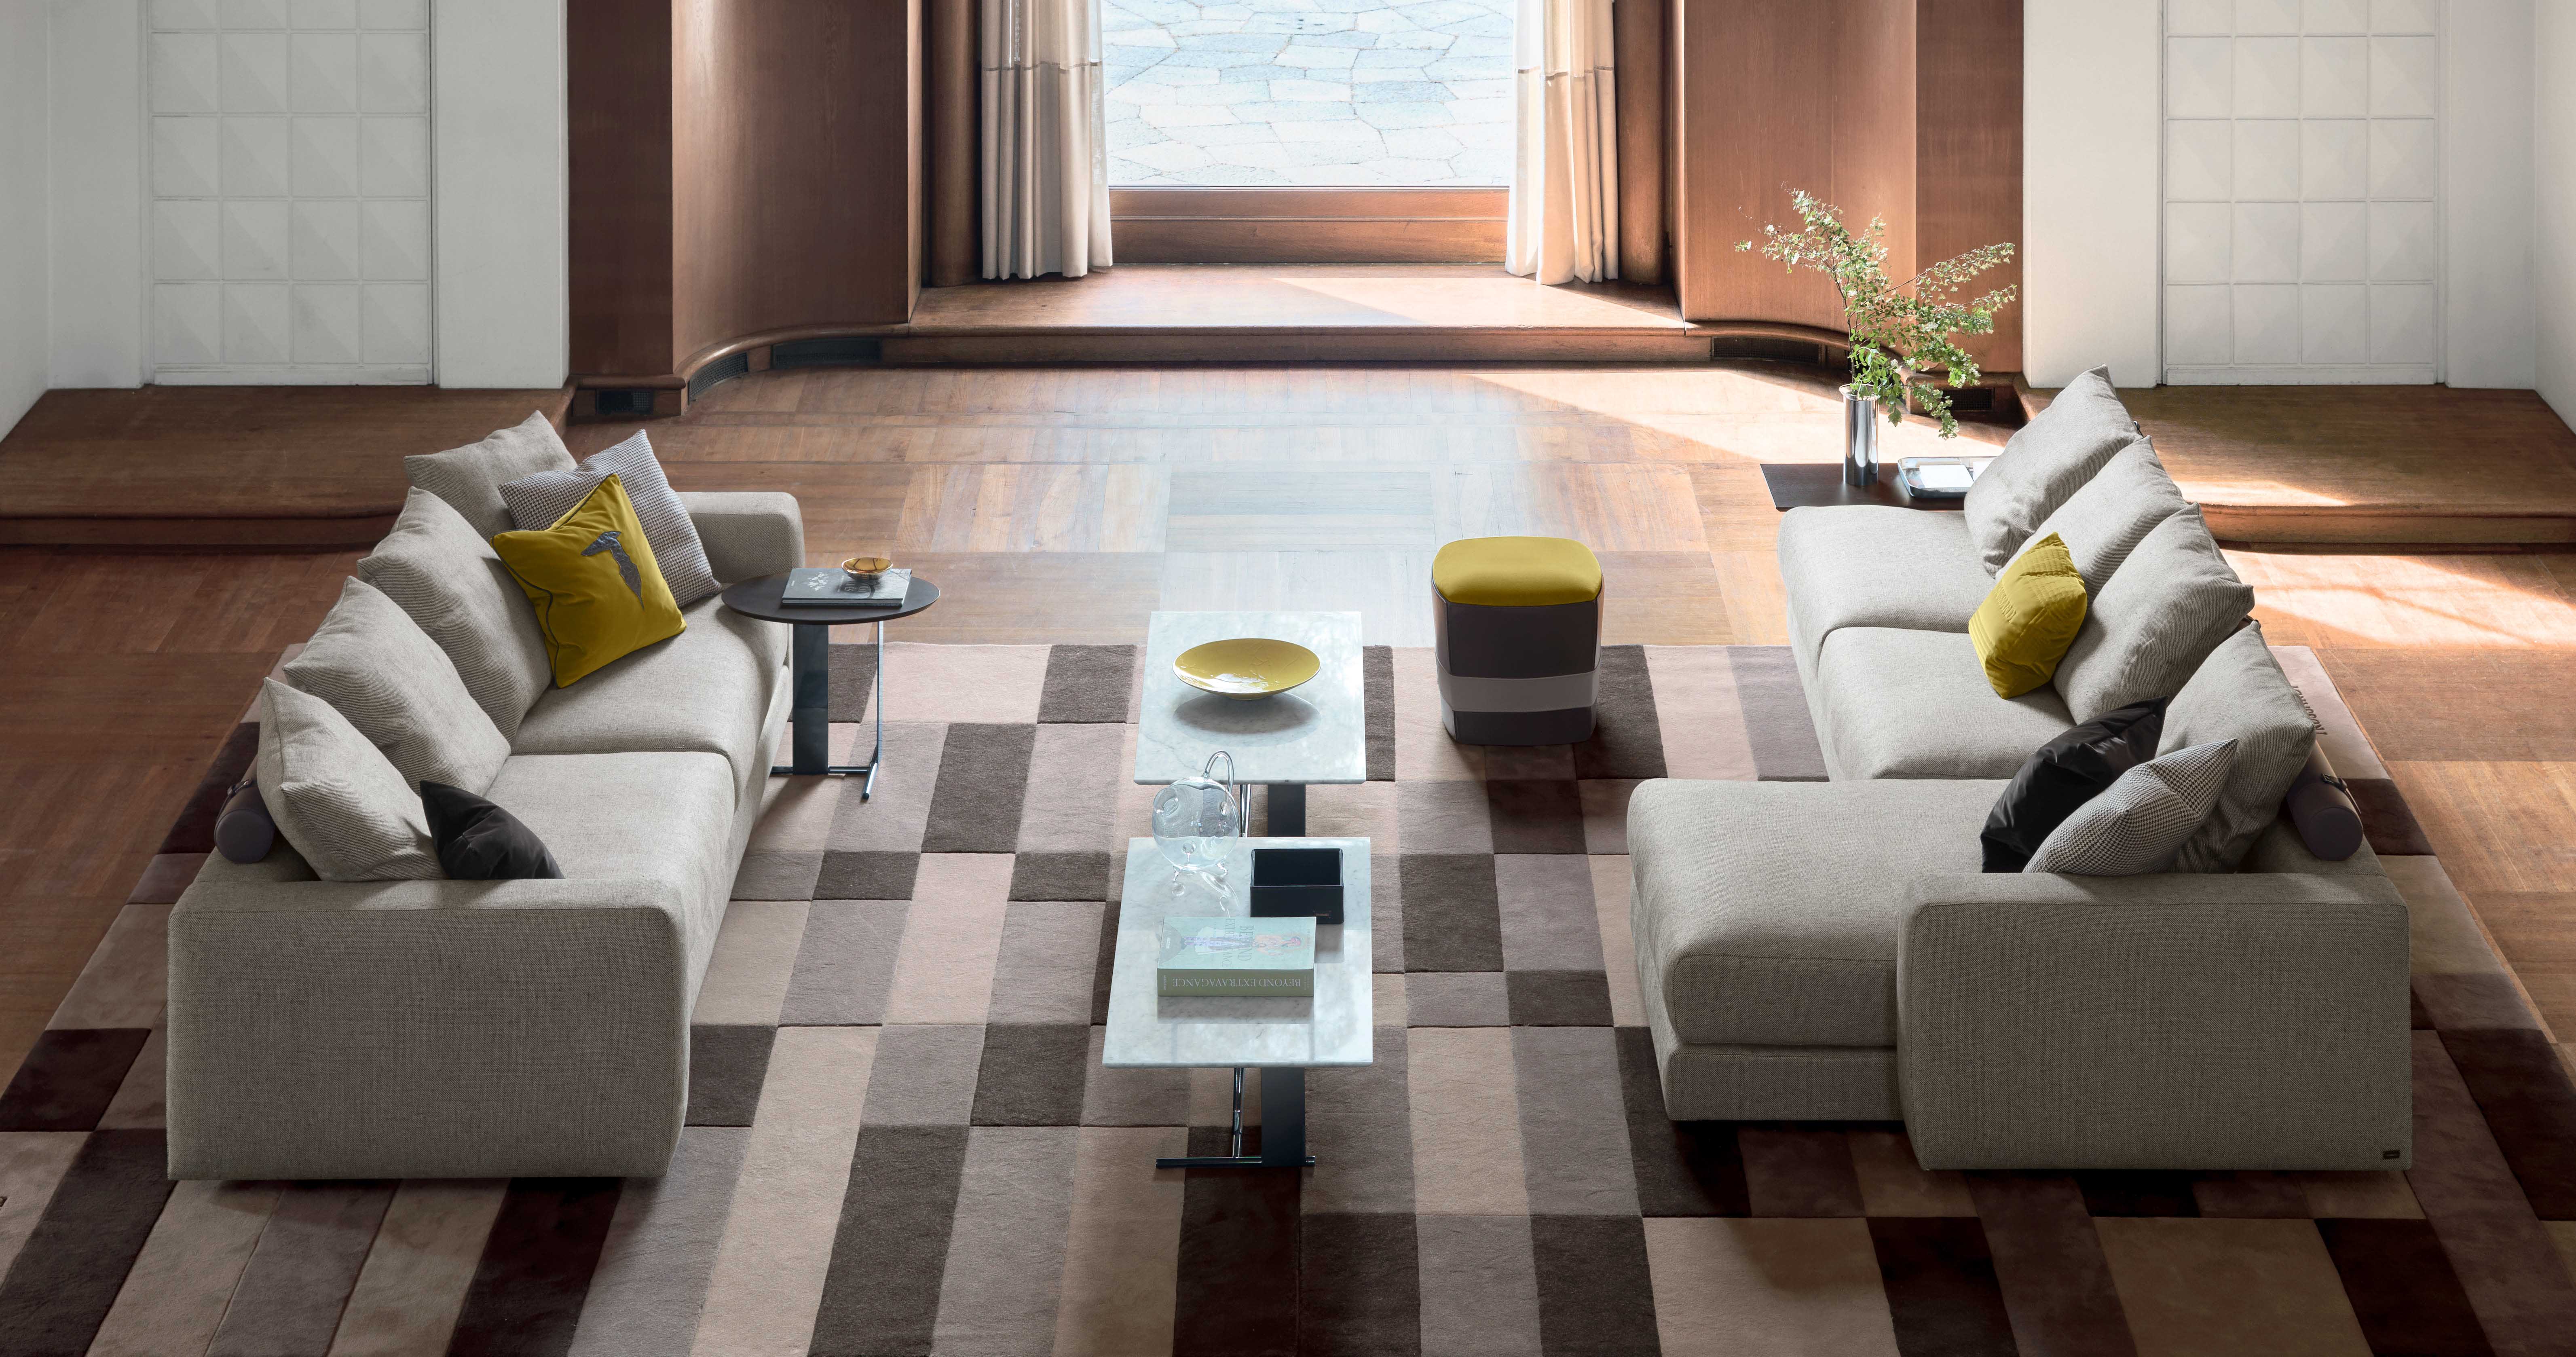 Trussardi Liam II sectional sofas, Sidy coffee and side tables, Pouf 414 ottoman, Field rug